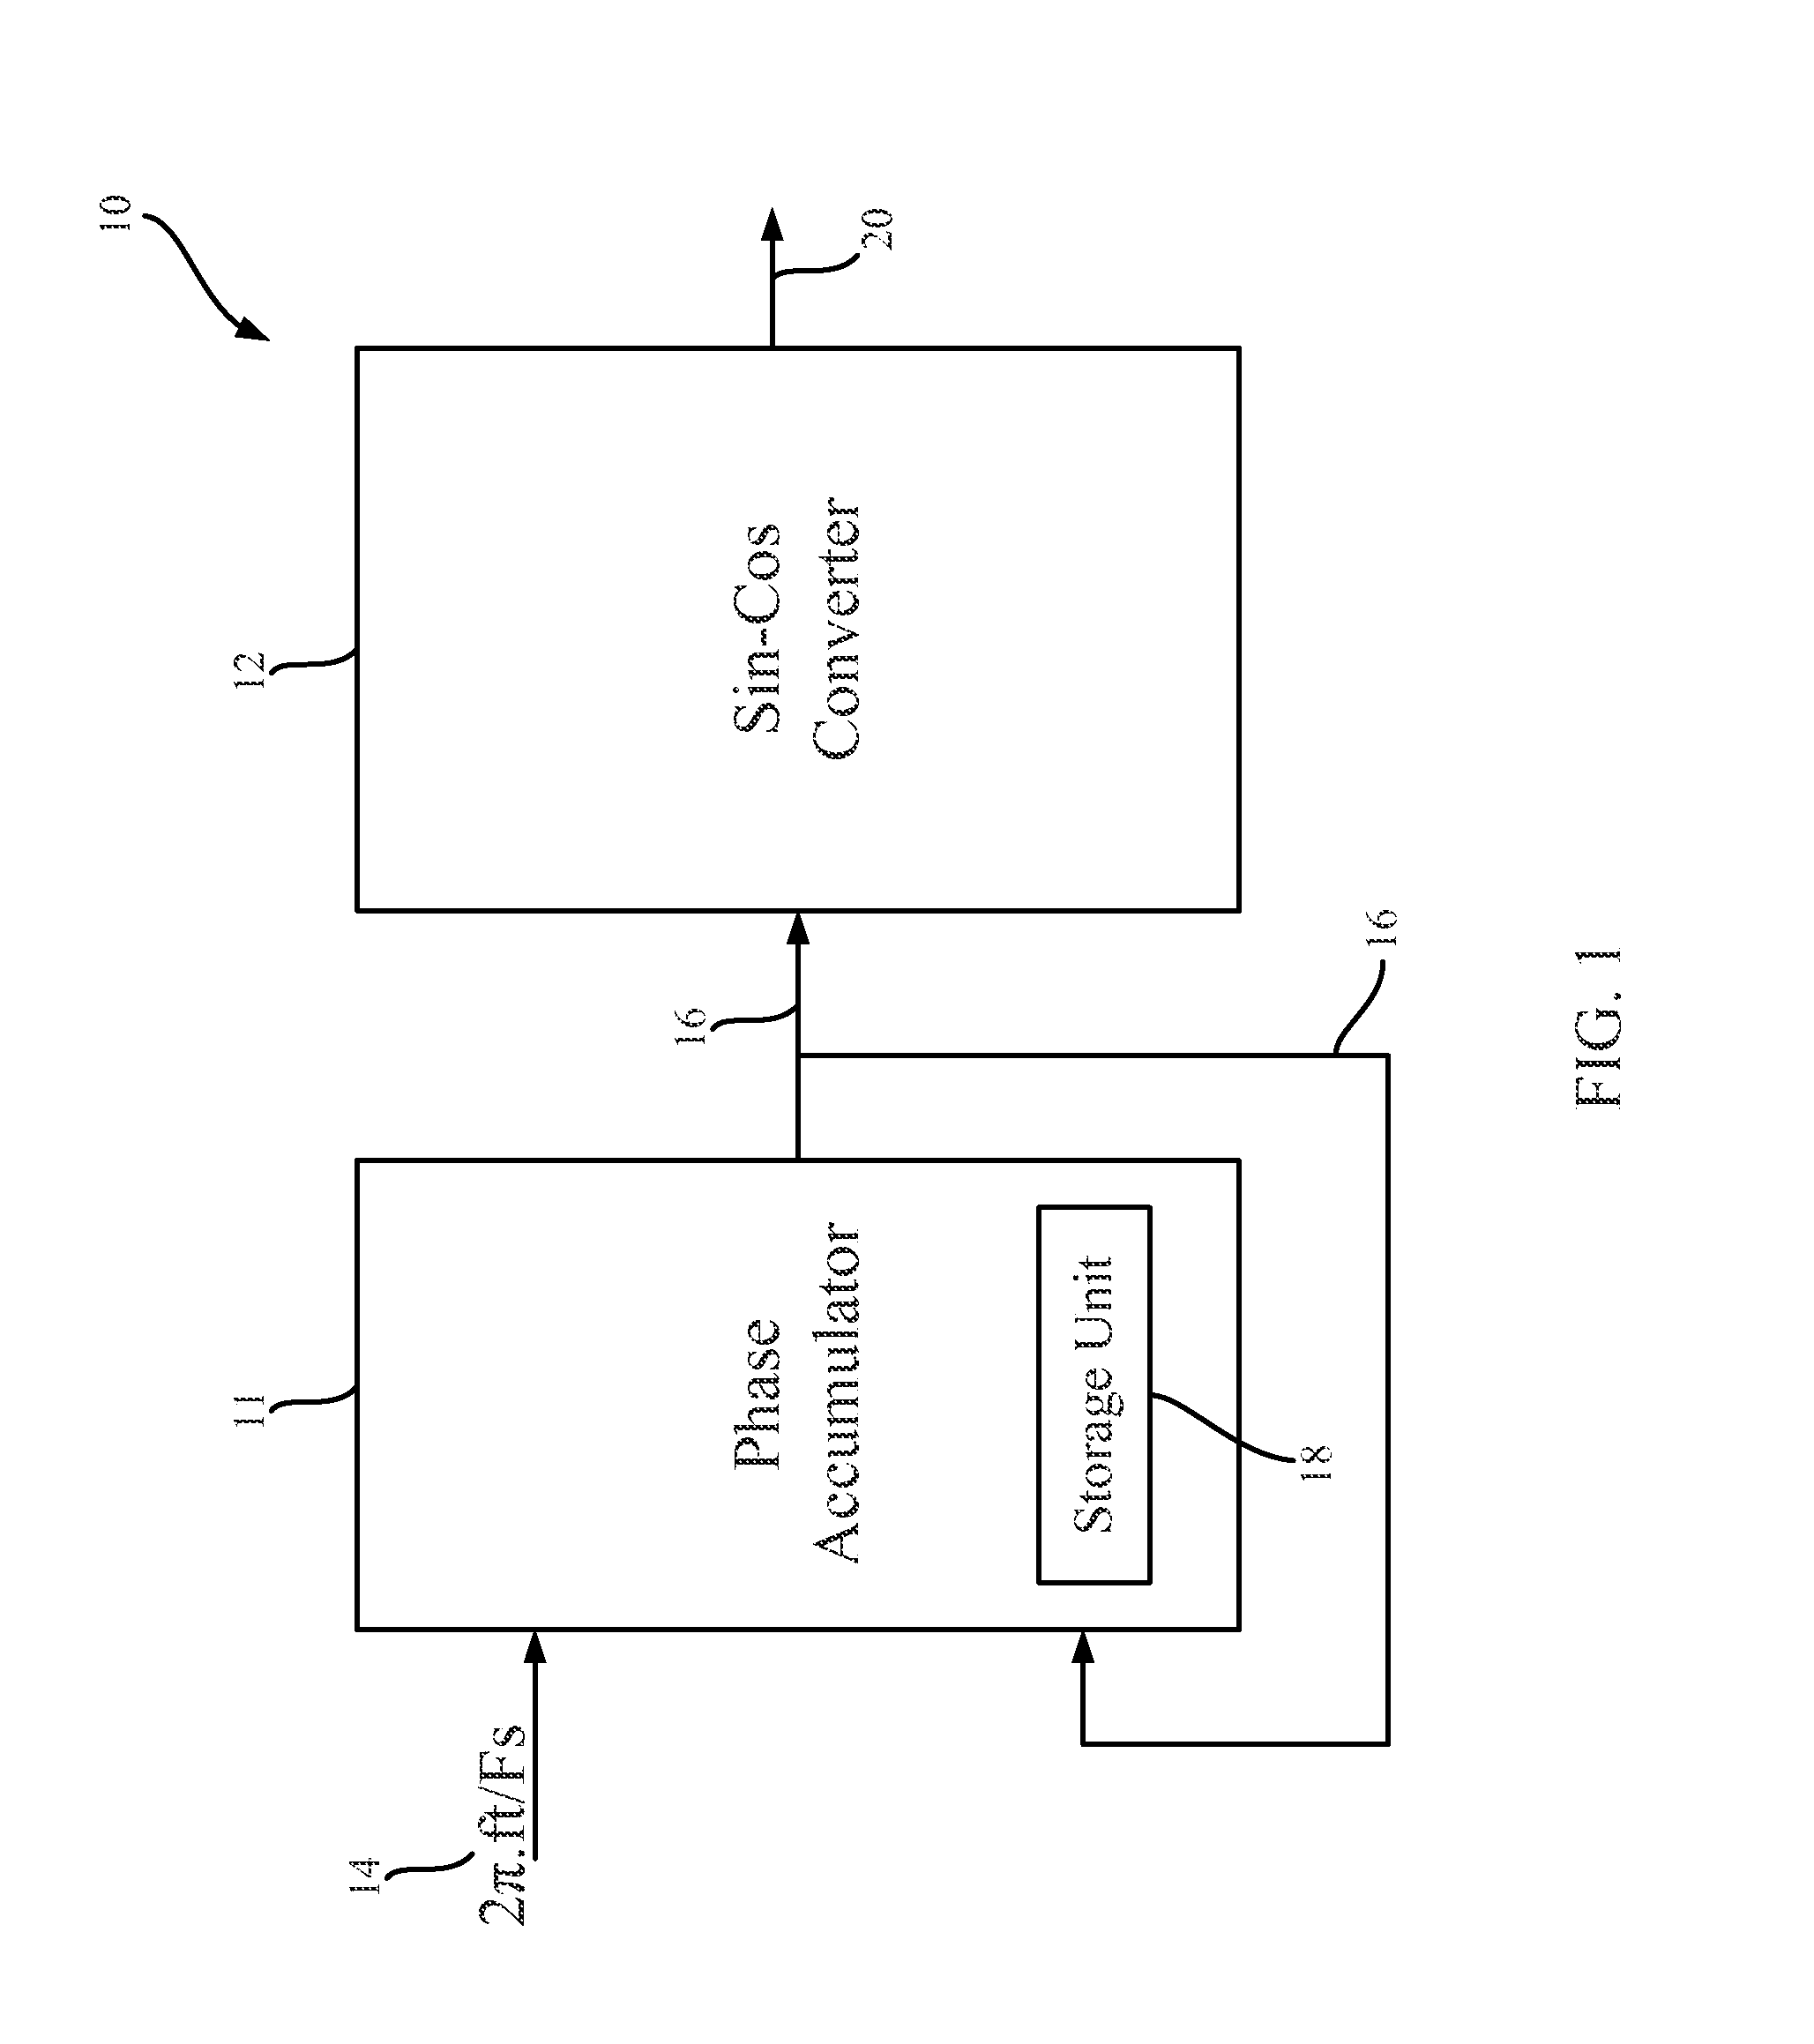 High accuracy sin-cos wave and frequency generators, and related systems and methods